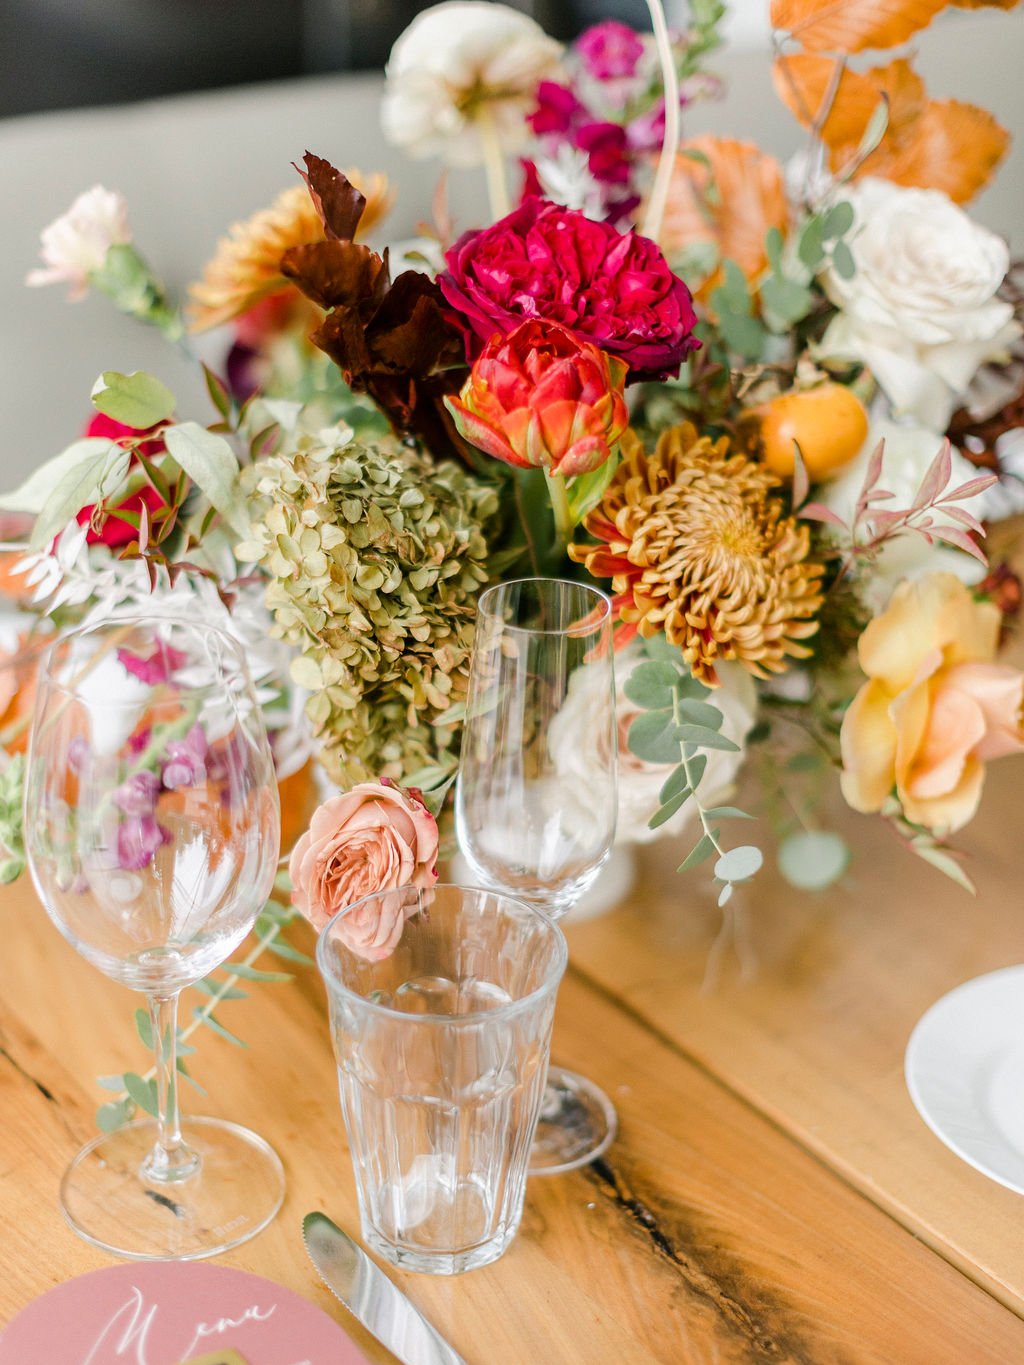 Eye-catching floral centerpieces comprised of tangerine, dusty rose, terra cotta, and deep red florals. Featuring garden roses, dried foliage, and fruity persimmons branches. Floral design by Rosemary and Finch in Nashville, TN.